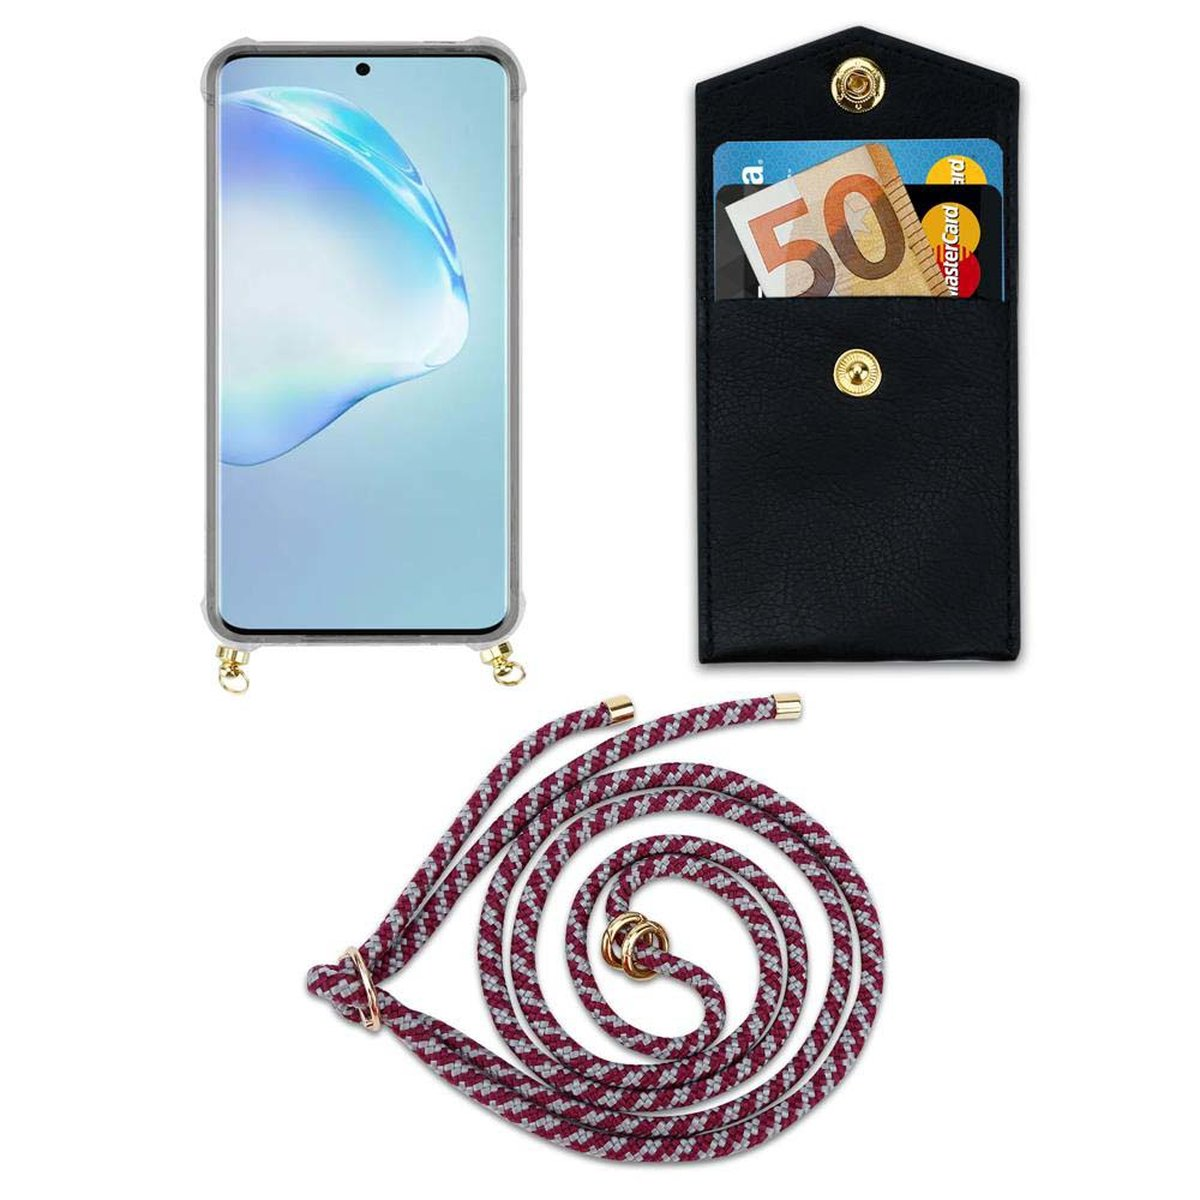 Kordel und mit CADORABO Band S20 ROT Backcover, Kette Ringen, abnehmbarer Handy Gold Samsung, Hülle, PLUS, Galaxy WEIß